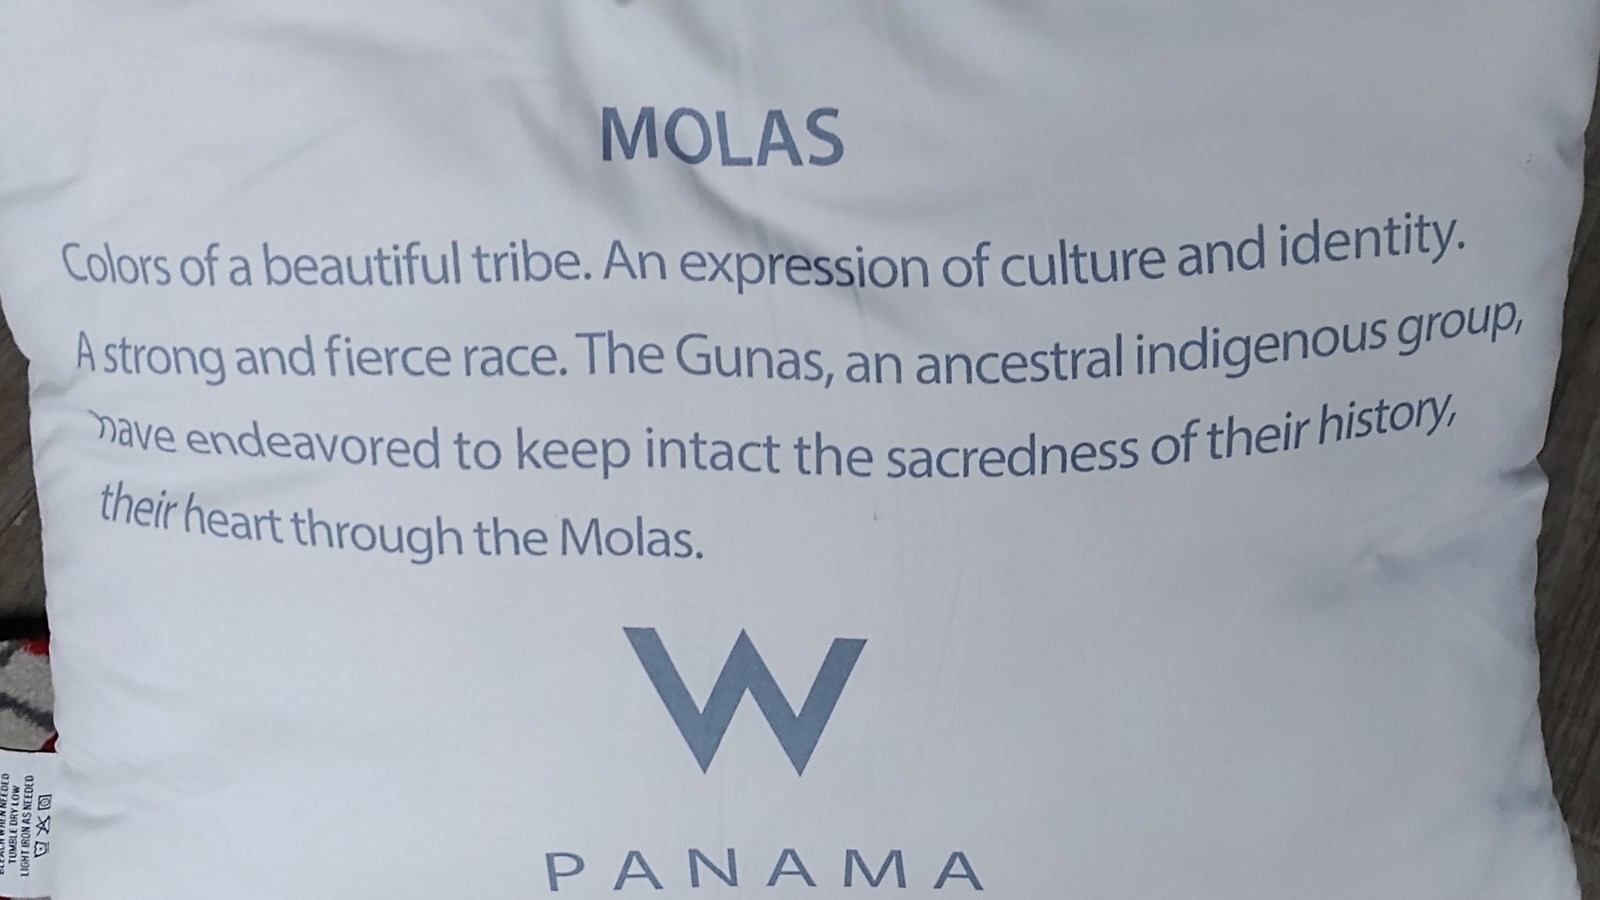 BACK OF THE PILLOW EXPLAINING THE ART OF THE INDIGENOUS GROUP IN THE COUNTRY.